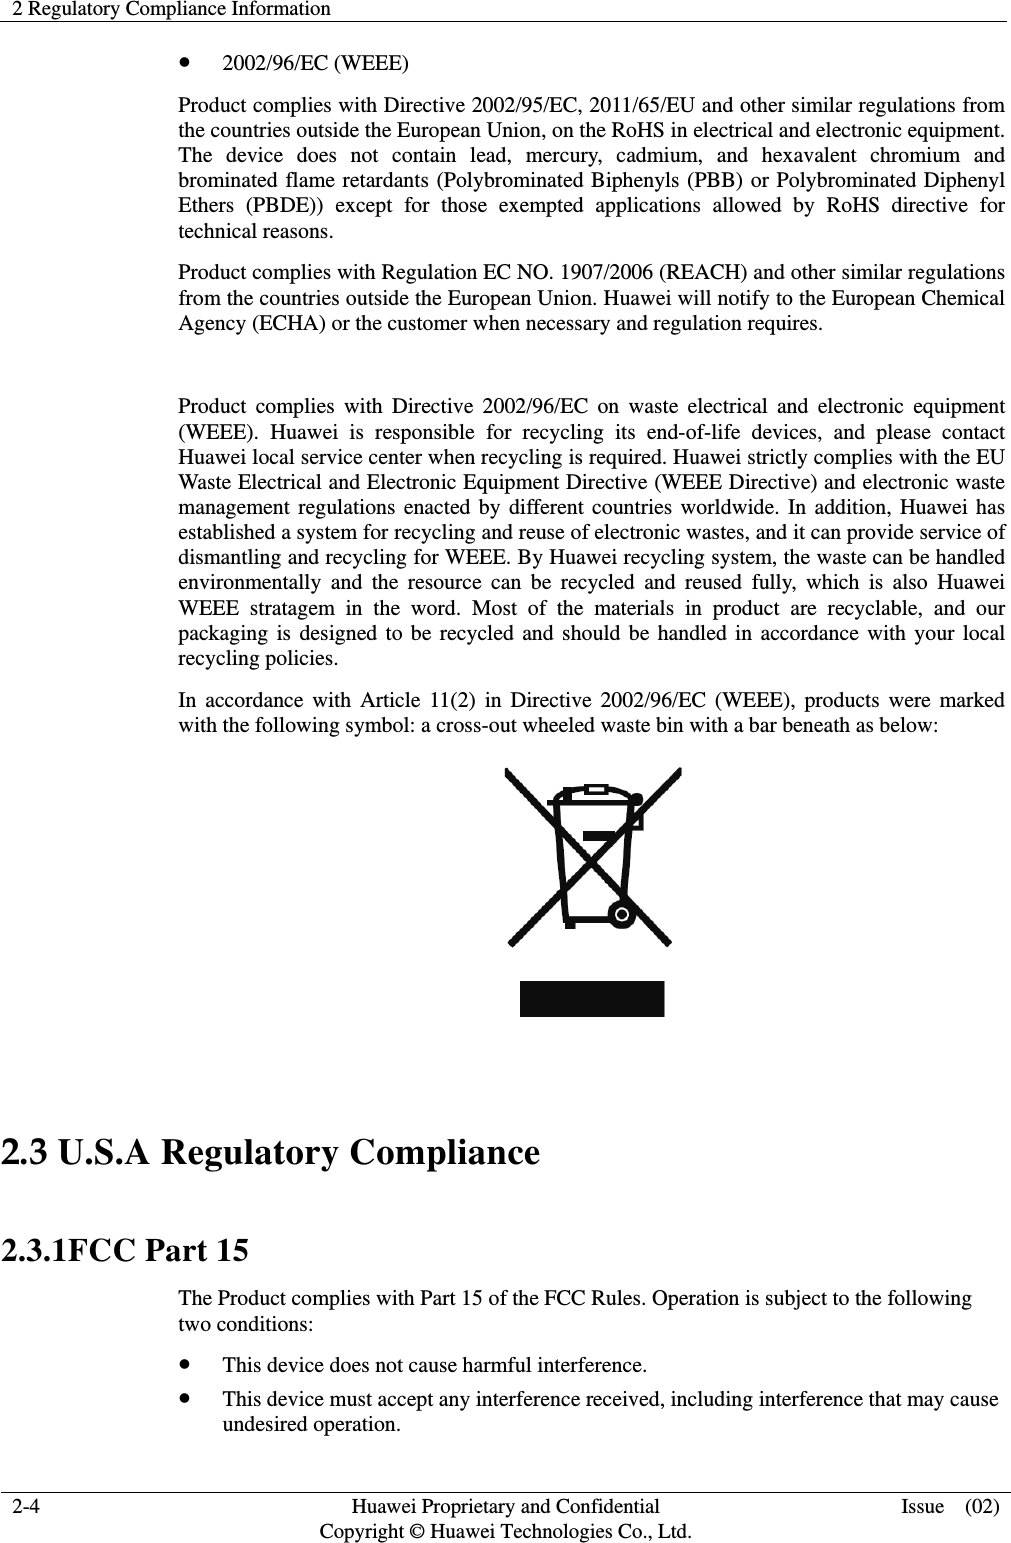 2 Regulatory Compliance Information   2-4  Huawei Proprietary and Confidential         Copyright © Huawei Technologies Co., Ltd. Issue  (02) z 2002/96/EC (WEEE) Product complies with Directive 2002/95/EC, 2011/65/EU and other similar regulations from the countries outside the European Union, on the RoHS in electrical and electronic equipment. The device does not contain lead, mercury, cadmium, and hexavalent chromium and brominated flame retardants (Polybrominated Biphenyls (PBB) or Polybrominated Diphenyl Ethers (PBDE)) except for those exempted applications allowed by RoHS directive for technical reasons.   Product complies with Regulation EC NO. 1907/2006 (REACH) and other similar regulations from the countries outside the European Union. Huawei will notify to the European Chemical Agency (ECHA) or the customer when necessary and regulation requires.  Product complies with Directive 2002/96/EC on waste electrical and electronic equipment (WEEE). Huawei is responsible for recycling its end-of-life devices, and please contact Huawei local service center when recycling is required. Huawei strictly complies with the EU Waste Electrical and Electronic Equipment Directive (WEEE Directive) and electronic waste management regulations enacted by different countries worldwide. In addition, Huawei has established a system for recycling and reuse of electronic wastes, and it can provide service of dismantling and recycling for WEEE. By Huawei recycling system, the waste can be handled environmentally and the resource can be recycled and reused fully, which is also Huawei WEEE stratagem in the word. Most of the materials in product are recyclable, and our packaging is designed to be recycled and should be handled in accordance with your local recycling policies.   In accordance with Article 11(2) in Directive 2002/96/EC (WEEE), products were marked with the following symbol: a cross-out wheeled waste bin with a bar beneath as below:   2.3 U.S.A Regulatory Compliance   2.3.1FCC Part 15 The Product complies with Part 15 of the FCC Rules. Operation is subject to the following two conditions: z This device does not cause harmful interference. z This device must accept any interference received, including interference that may cause undesired operation. 